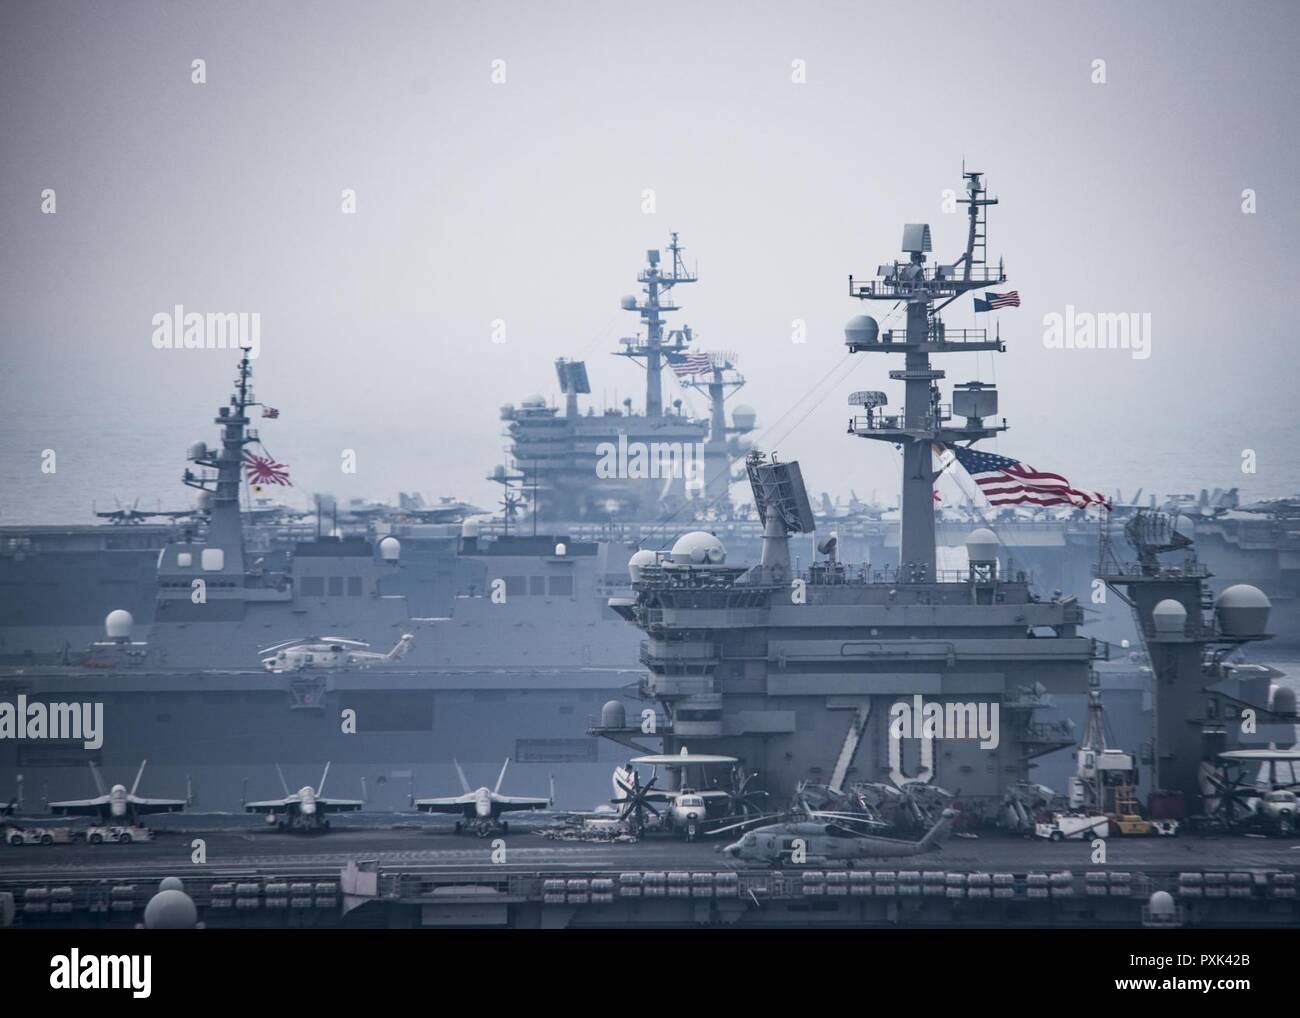 SEA OF JAPAN (June 1, 2017) The Carl Vinson strike group, including USS Carl Vinson (CVN 70), Carrier Air Wing (CVW) 2, guided-missile cruiser USS Lake Champlain (CG 57) and guided-missile destroyers USS Wayne E. Meyer (DDG 108) and USS Michael Murphy (DDG 112), operates with the Ronald Reagan strike group including, USS Ronald Reagan (CVN 76), Carrier Air Wing (CVW) 5, guided-missile cruiser USS Shiloh (CG 67), guided-missile destroyers USS Barry (DDG 52), USS McCampbell (DDG 85), USS Fitzgerald (DDG 62), and USS Mustin (DDG 89) and the Japanese Ships (JS) Hyuga (DDH 181) and JS Ashigara (DDG Stock Photo